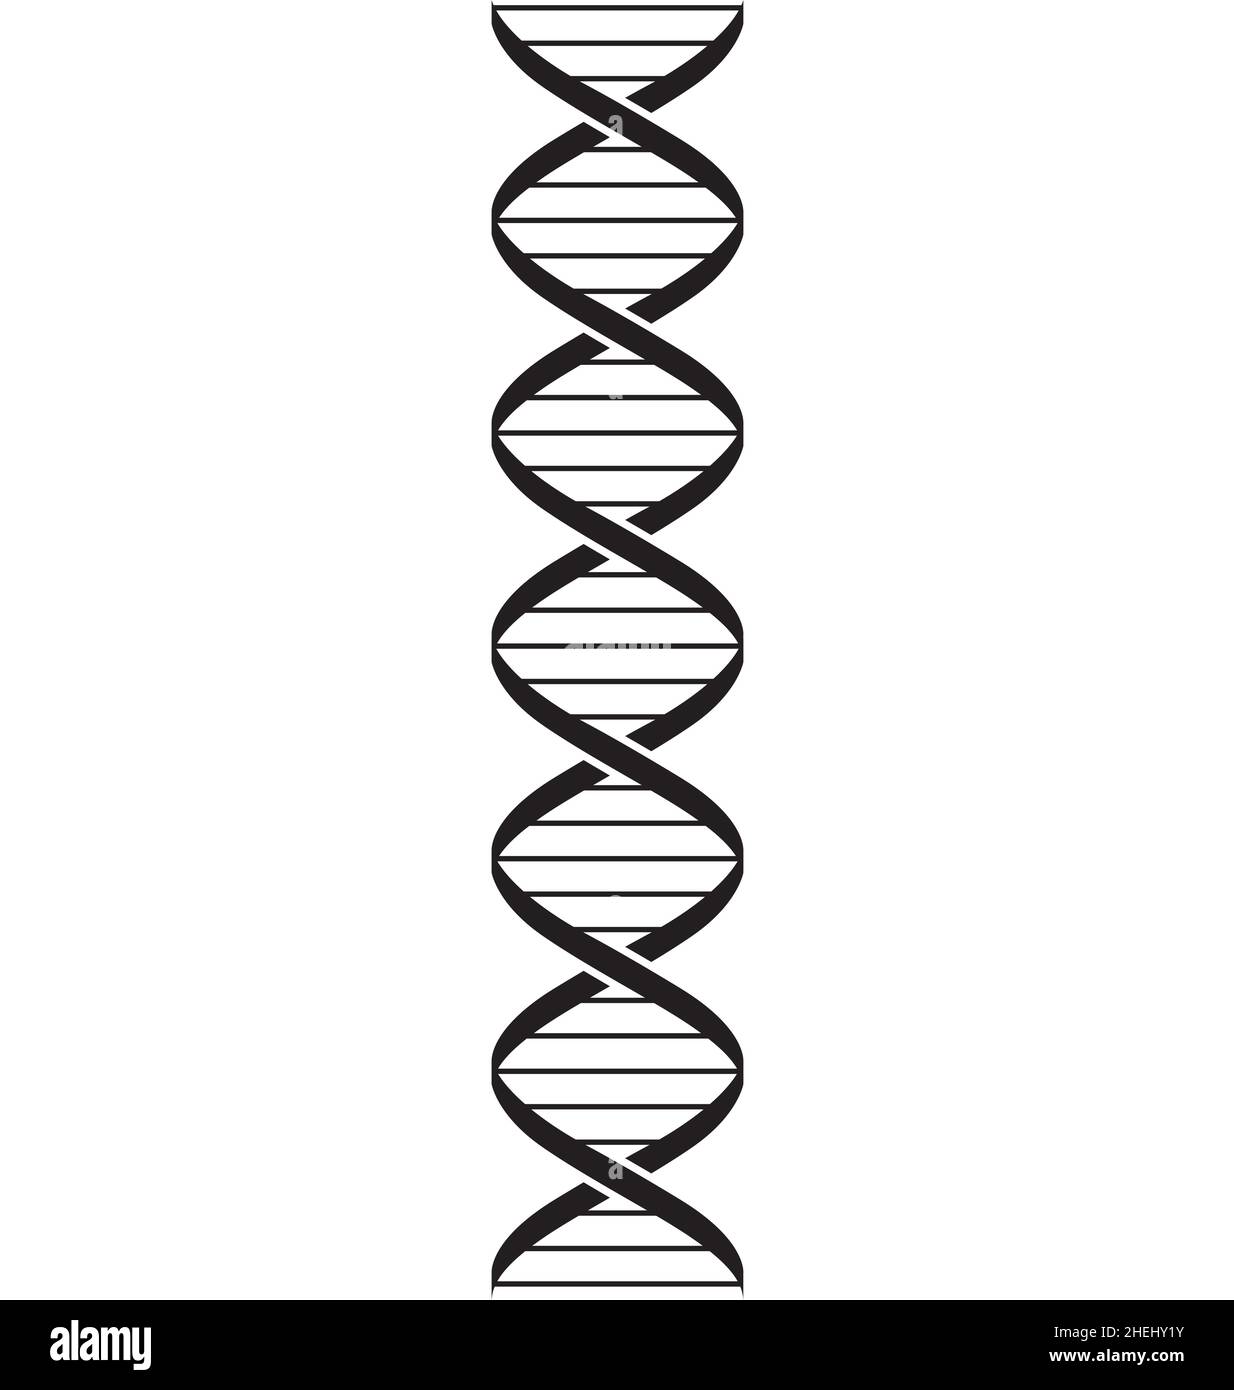 dna strand double helix icon element simplified black isolated on white background vector Stock Vector